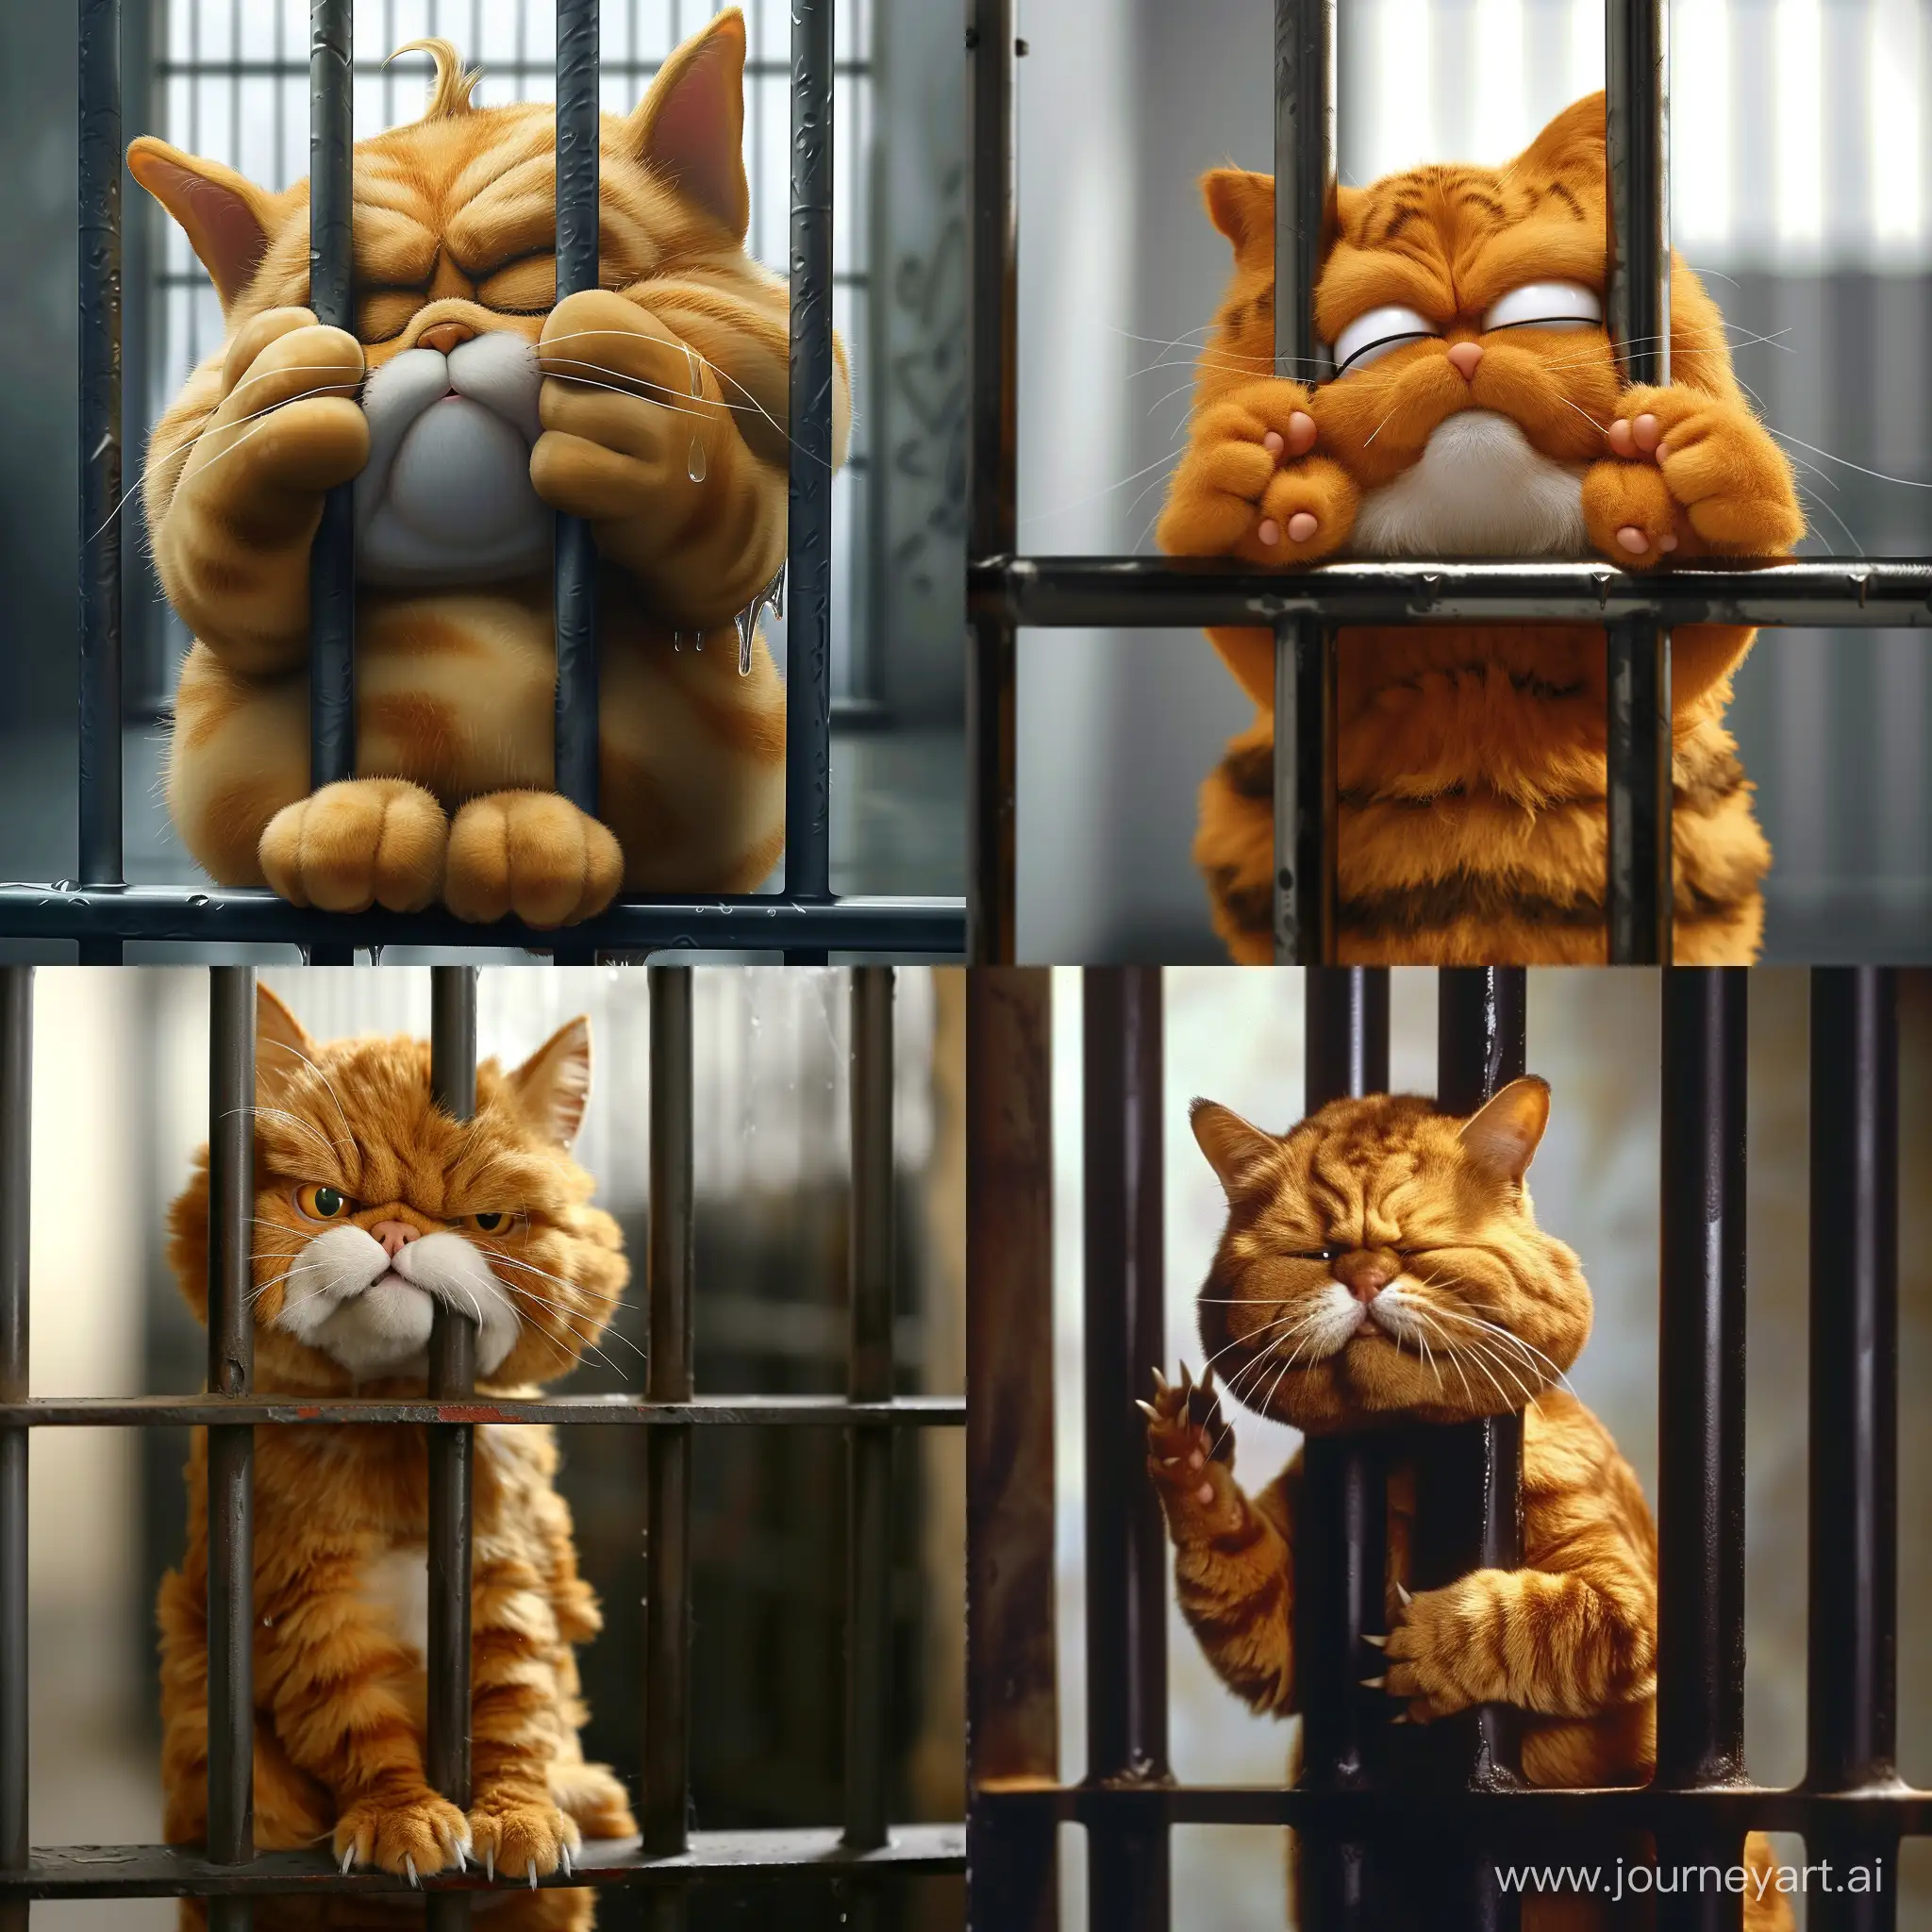 Emotional-Fat-Cat-Garfield-Crying-Behind-Bars-in-Prison